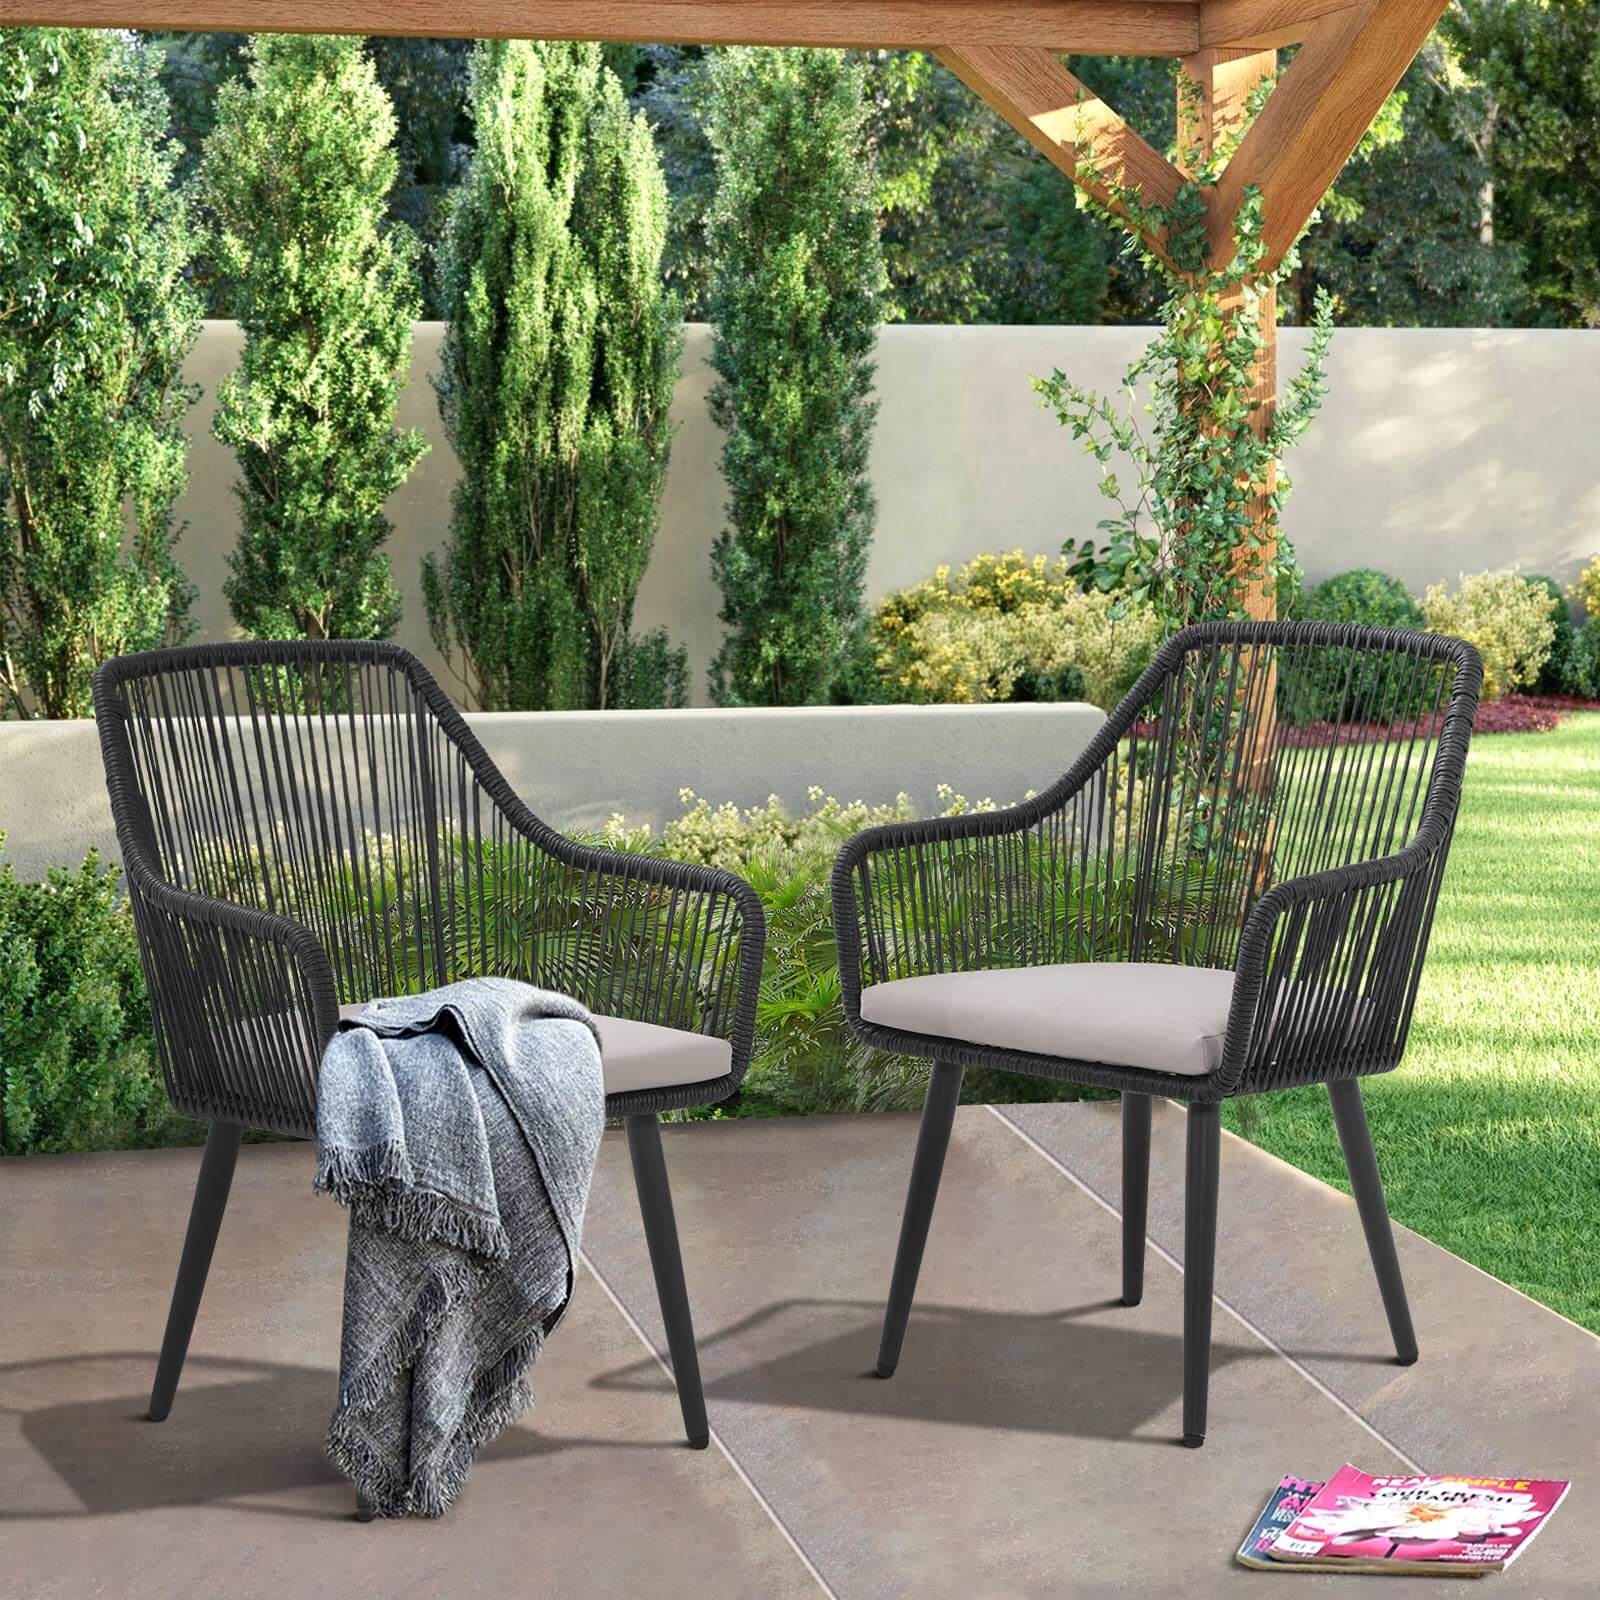 Outdoor Dining Chairs, All-Weather Woven Rope Rattan Wicker Chairs, Patio Dining Chair Set